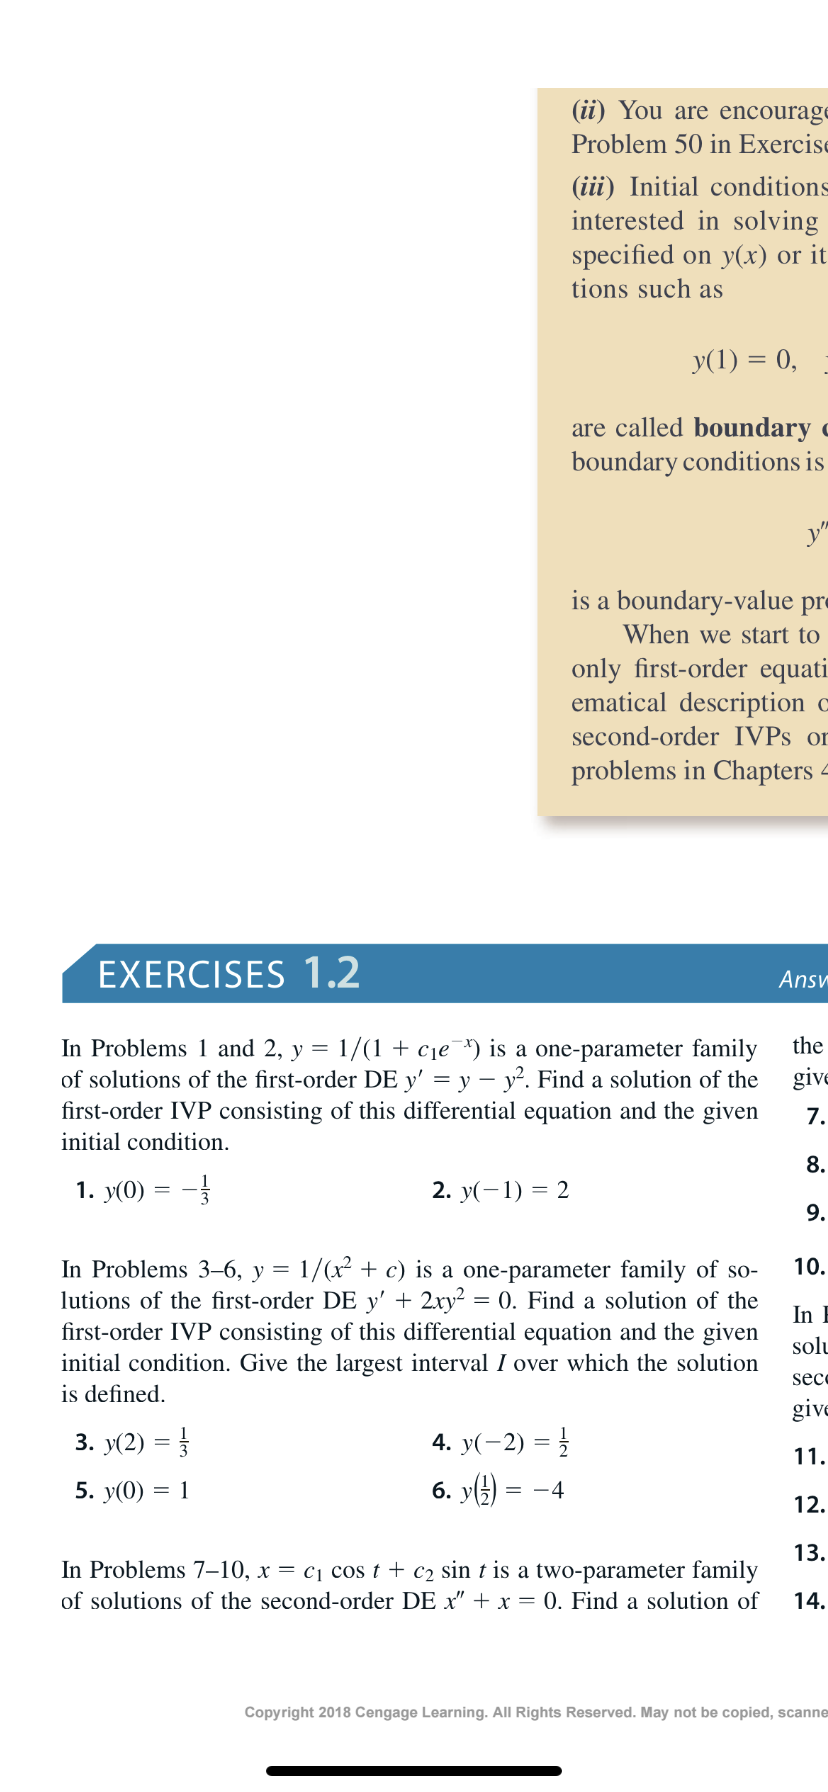 (ii) You are encourage
Problem 50 in Exercise
(iii) Initial conditions
interested in solving
specified on y(x) or it
tions such as
y(1) = 0,
are called boundary c
boundary conditions is
is a boundary-value pr=
When we start to
only first-order equati.
ematical description c
second-order IVPS or
problems in Chapters 4
EXERCISES 1.2
Ansv
In Problems 1 and 2, y = 1/(1 + cje¯*) is a one-parameter family
of solutions of the first-order DE y' = y – y². Find a solution of the
first-order IVP consisting of this differential equation and the given
the
give
7.
initial condition.
8.
1. y(0) = -
2. У(- 1) —
9.
In Problems 3–6, y = 1/(x² + c) is a one-parameter family of so-
lutions of the first-order DE y' + 2xy² = 0. Find a solution of the
first-order IVP consisting of this differential equation and the given
initial condition. Give the largest interval I over which the solution
is defined.
10.
In E
solu
sece
give
3. y(2) = }
4. y(-2) = }
11.
6. y() =
5. y(0)
12.
13.
In Problems 7–10, x = c1 cos t + c2 sin t is a two-parameter family
of solutions of the second-order DE x" + x = 0. Find a solution of
14.
Copyright 2018 Cengage Learning. All Rights Reserved. May not be copied, scanne
